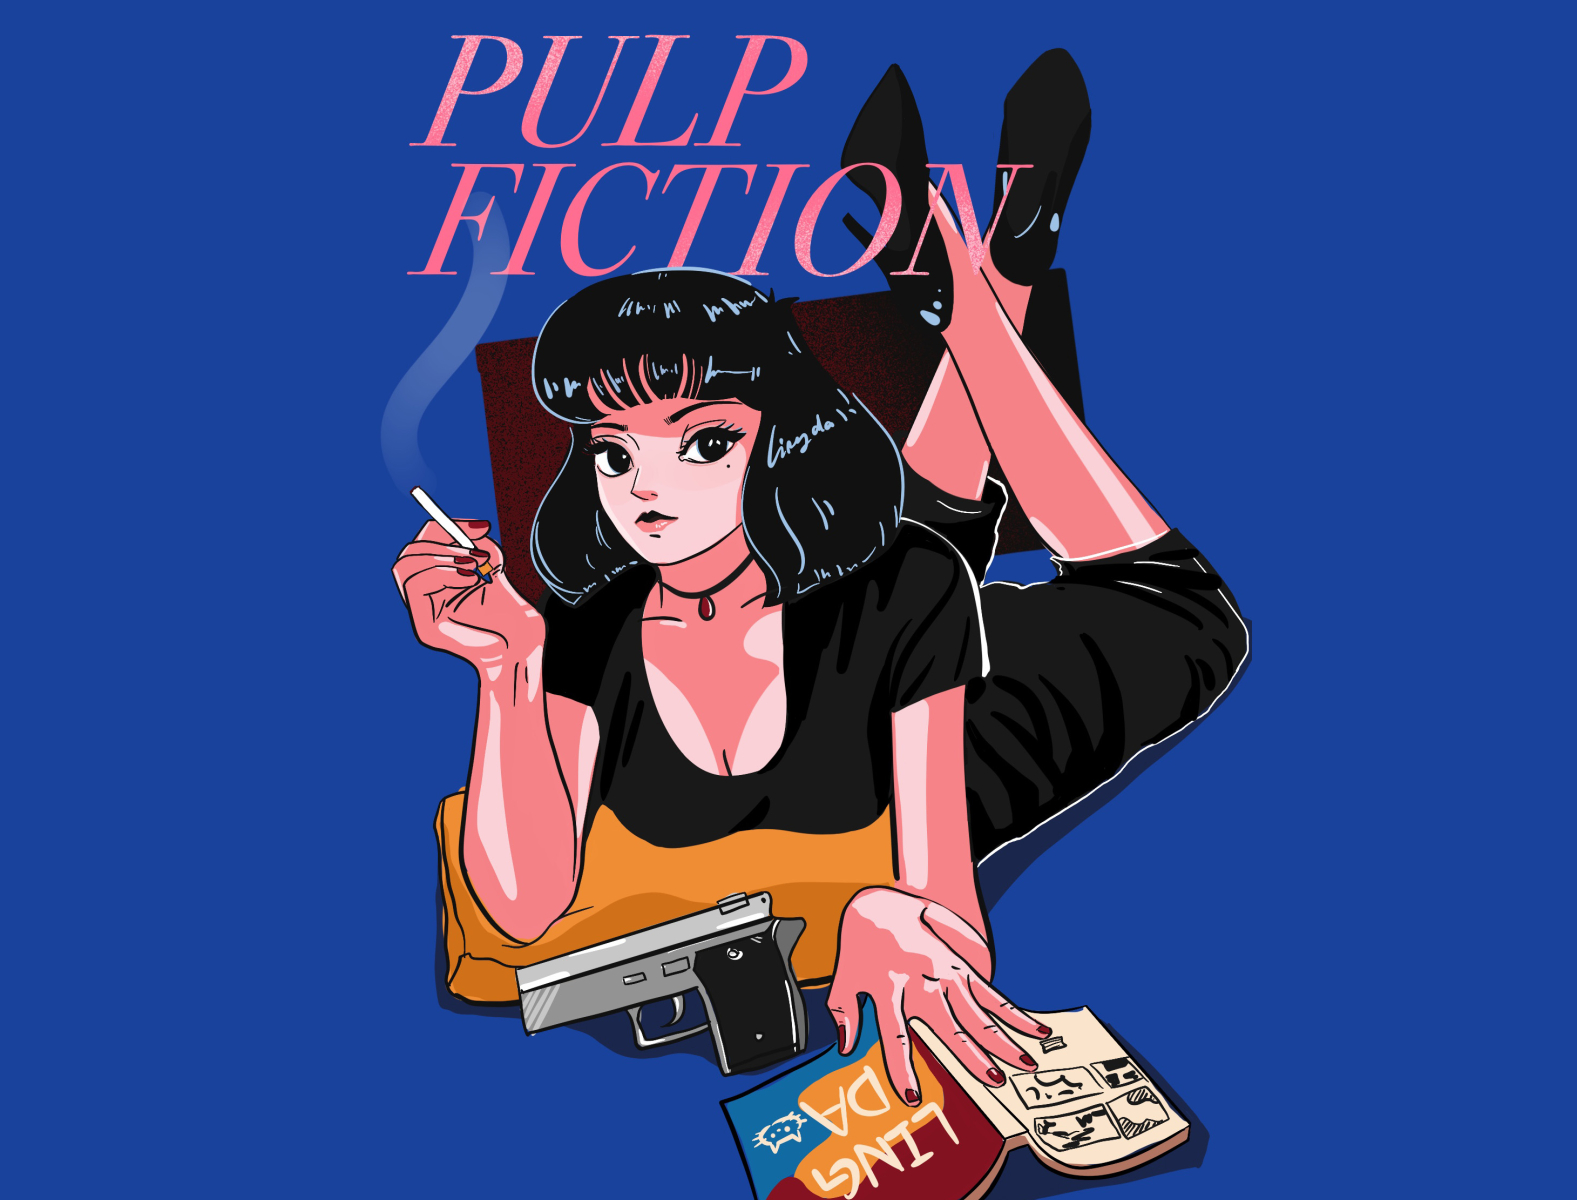  Pulp  Fiction  by kongdaling for DWTD on Dribbble